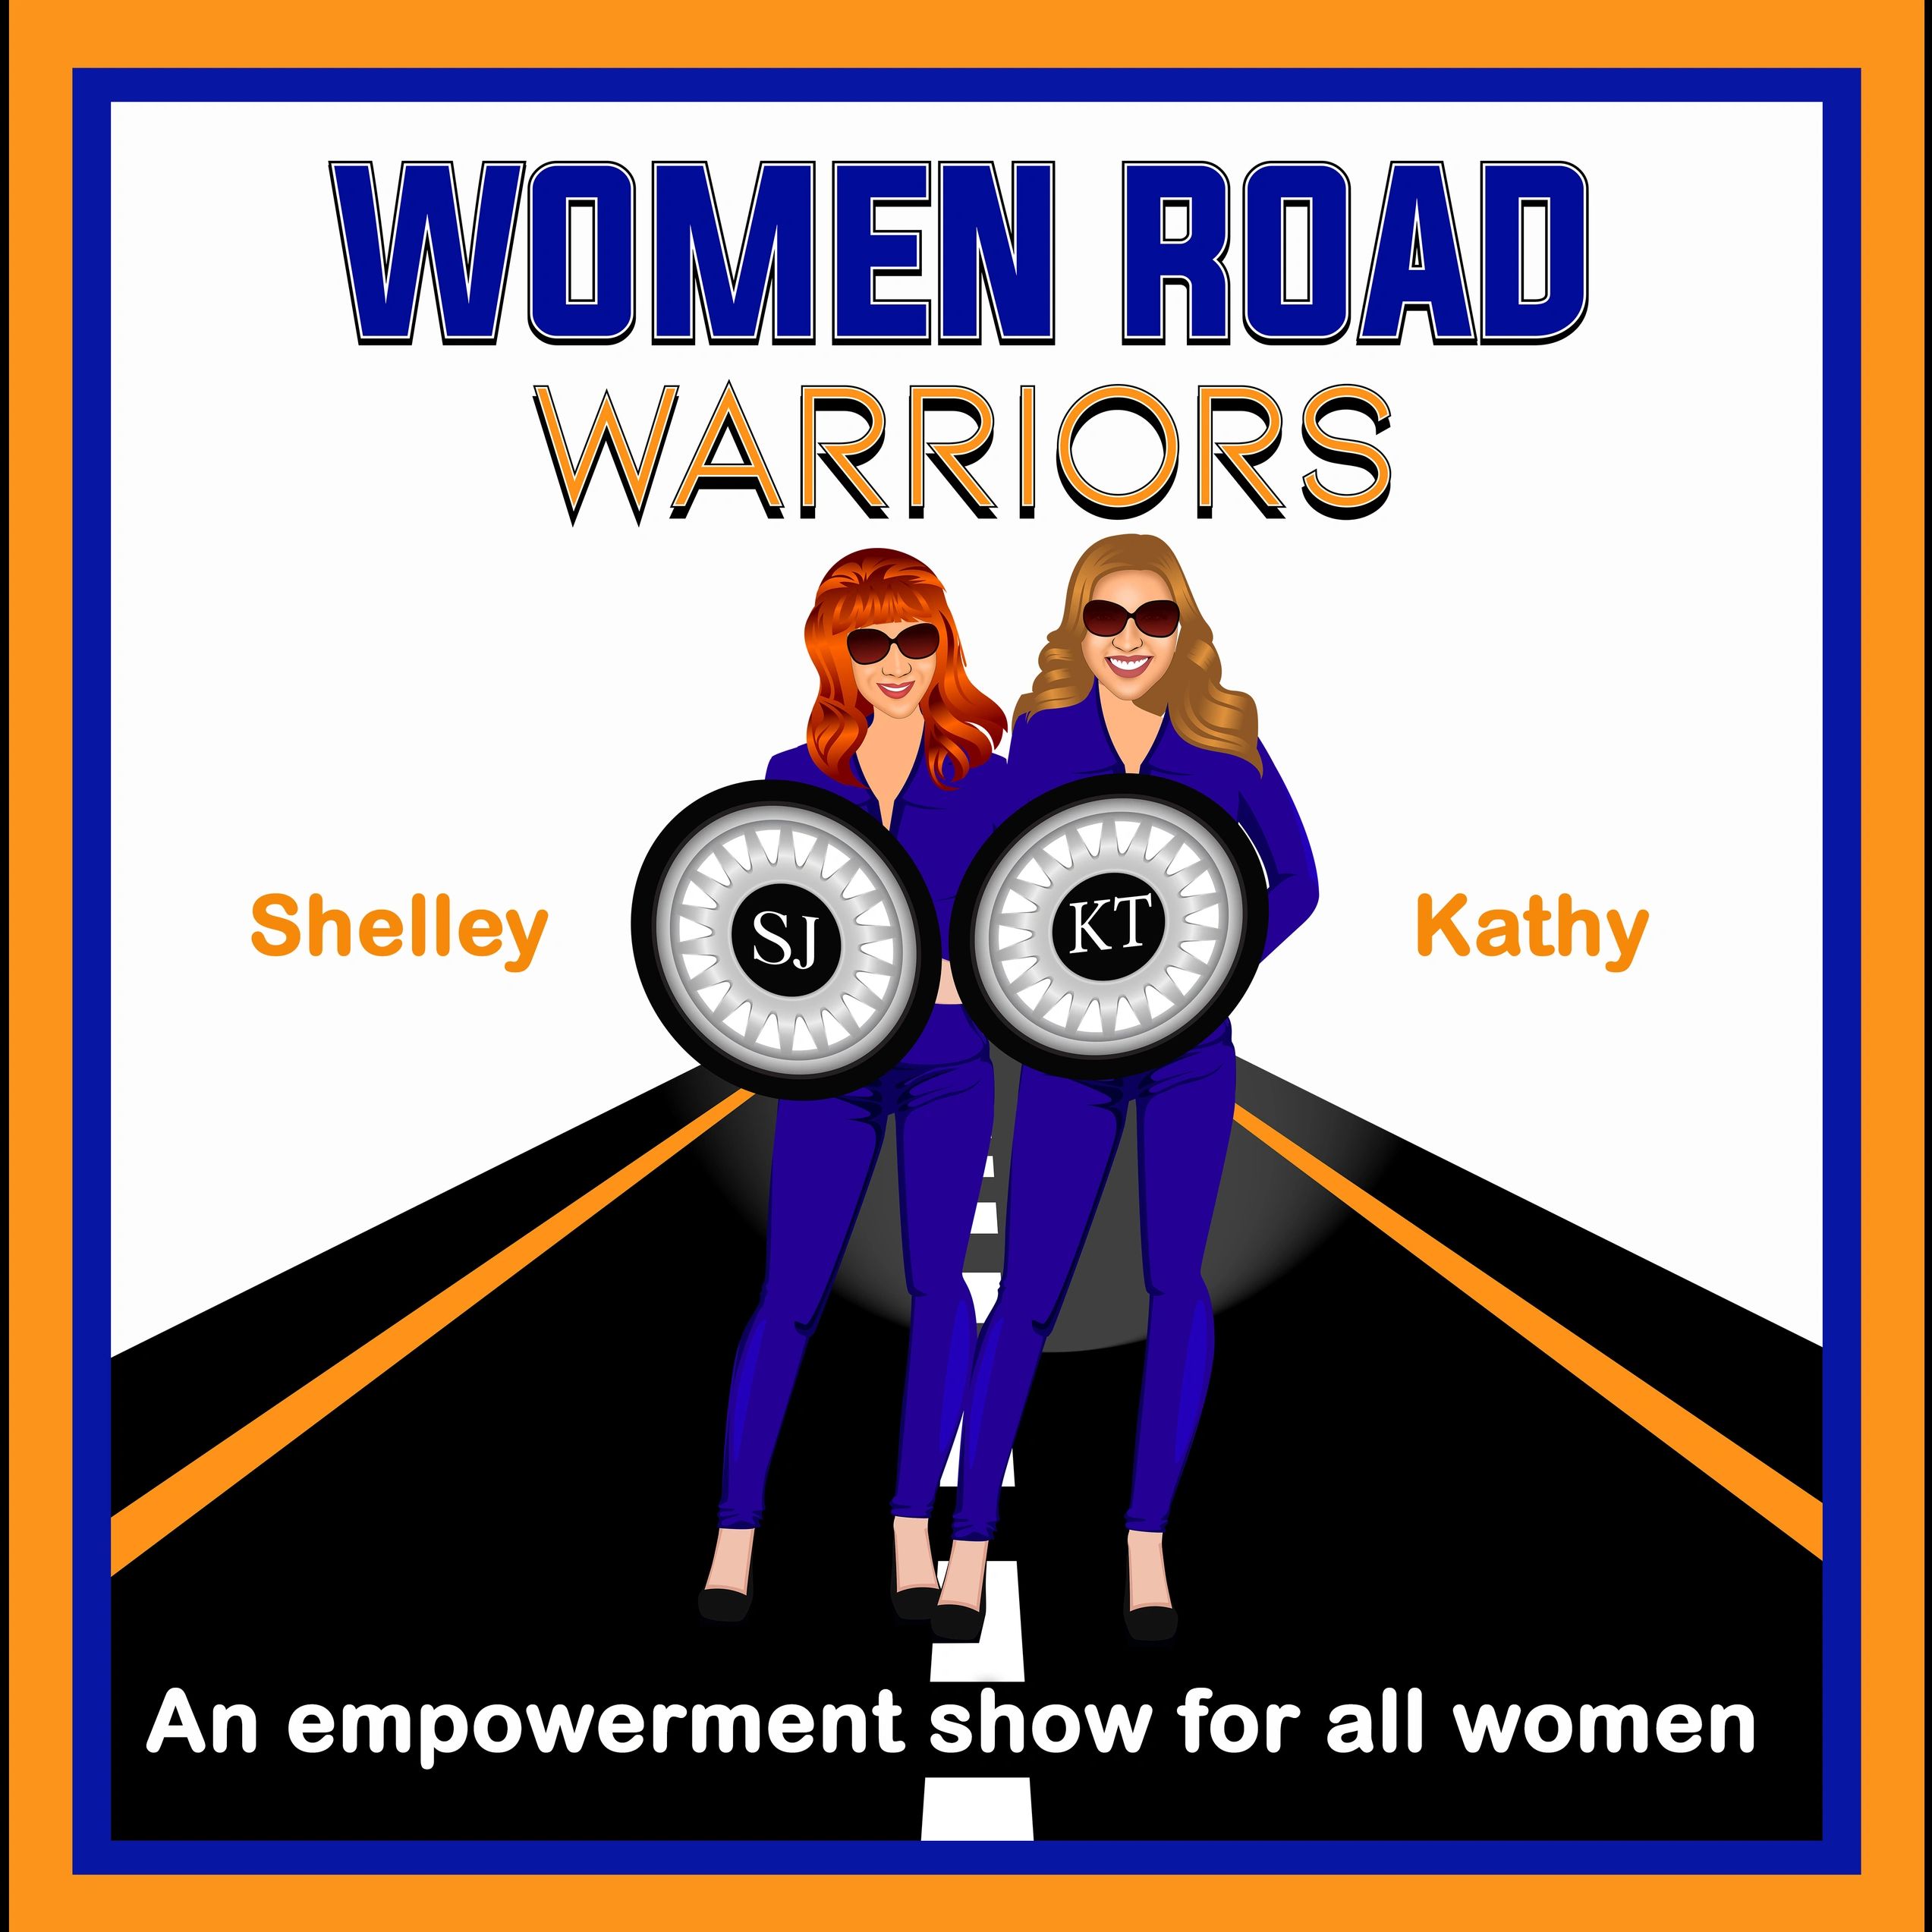 The Women Road Warriors empowerment talk show is hosted by Shelley M. Johnson and Kathy Tuccaro.